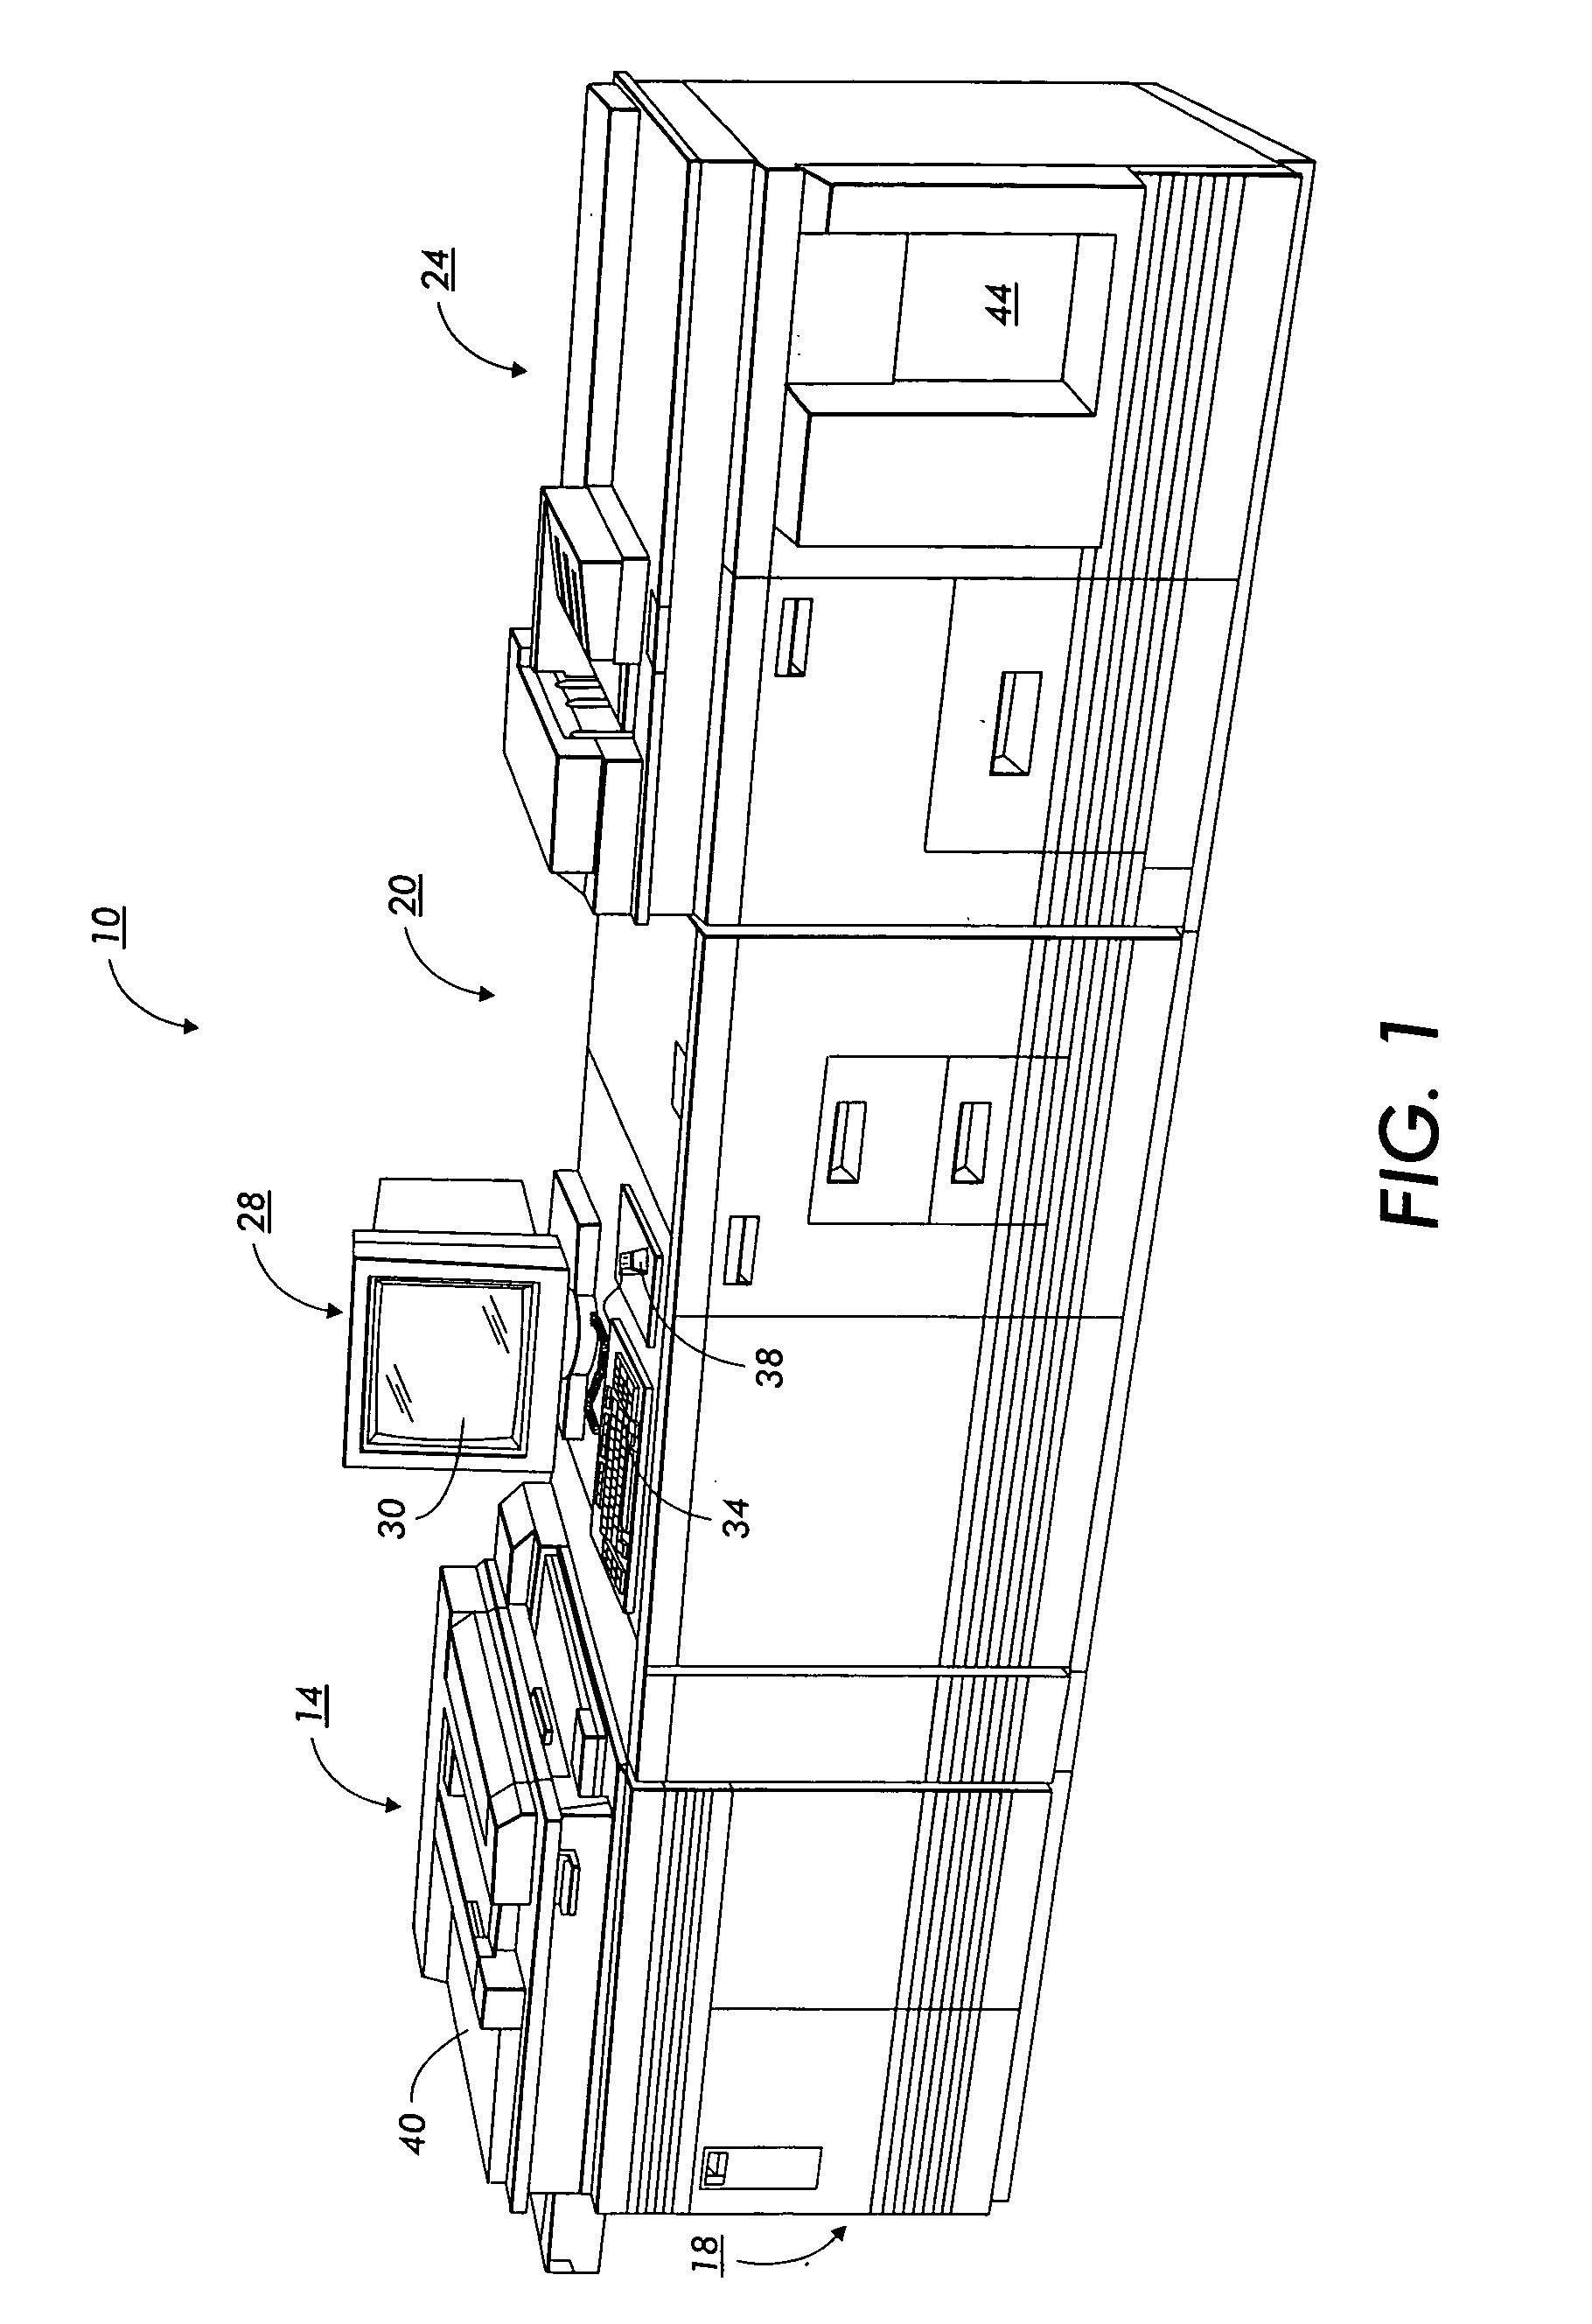 Method and system for multi-page exception programming in a document management system